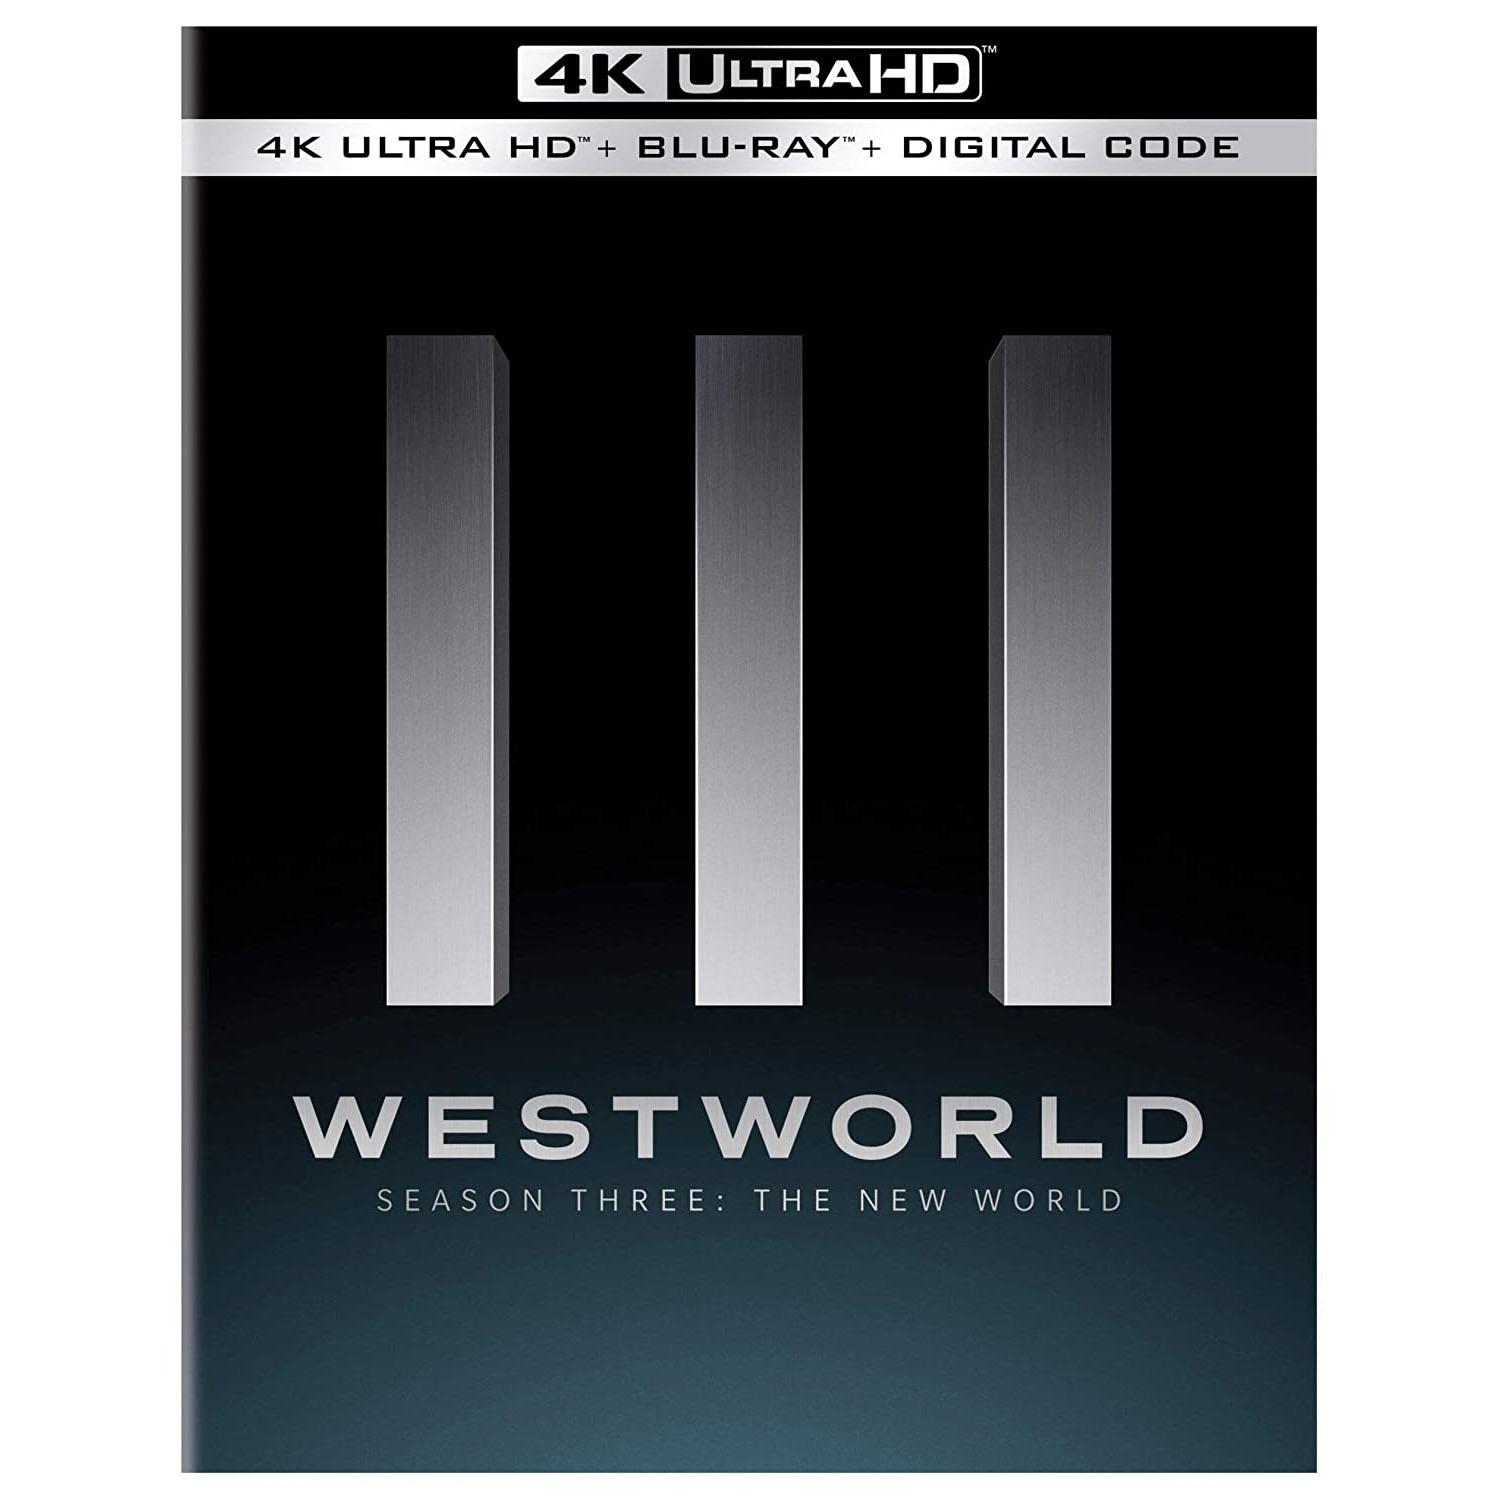 Westworld The Complete Third Season Blu-ray for $18.99